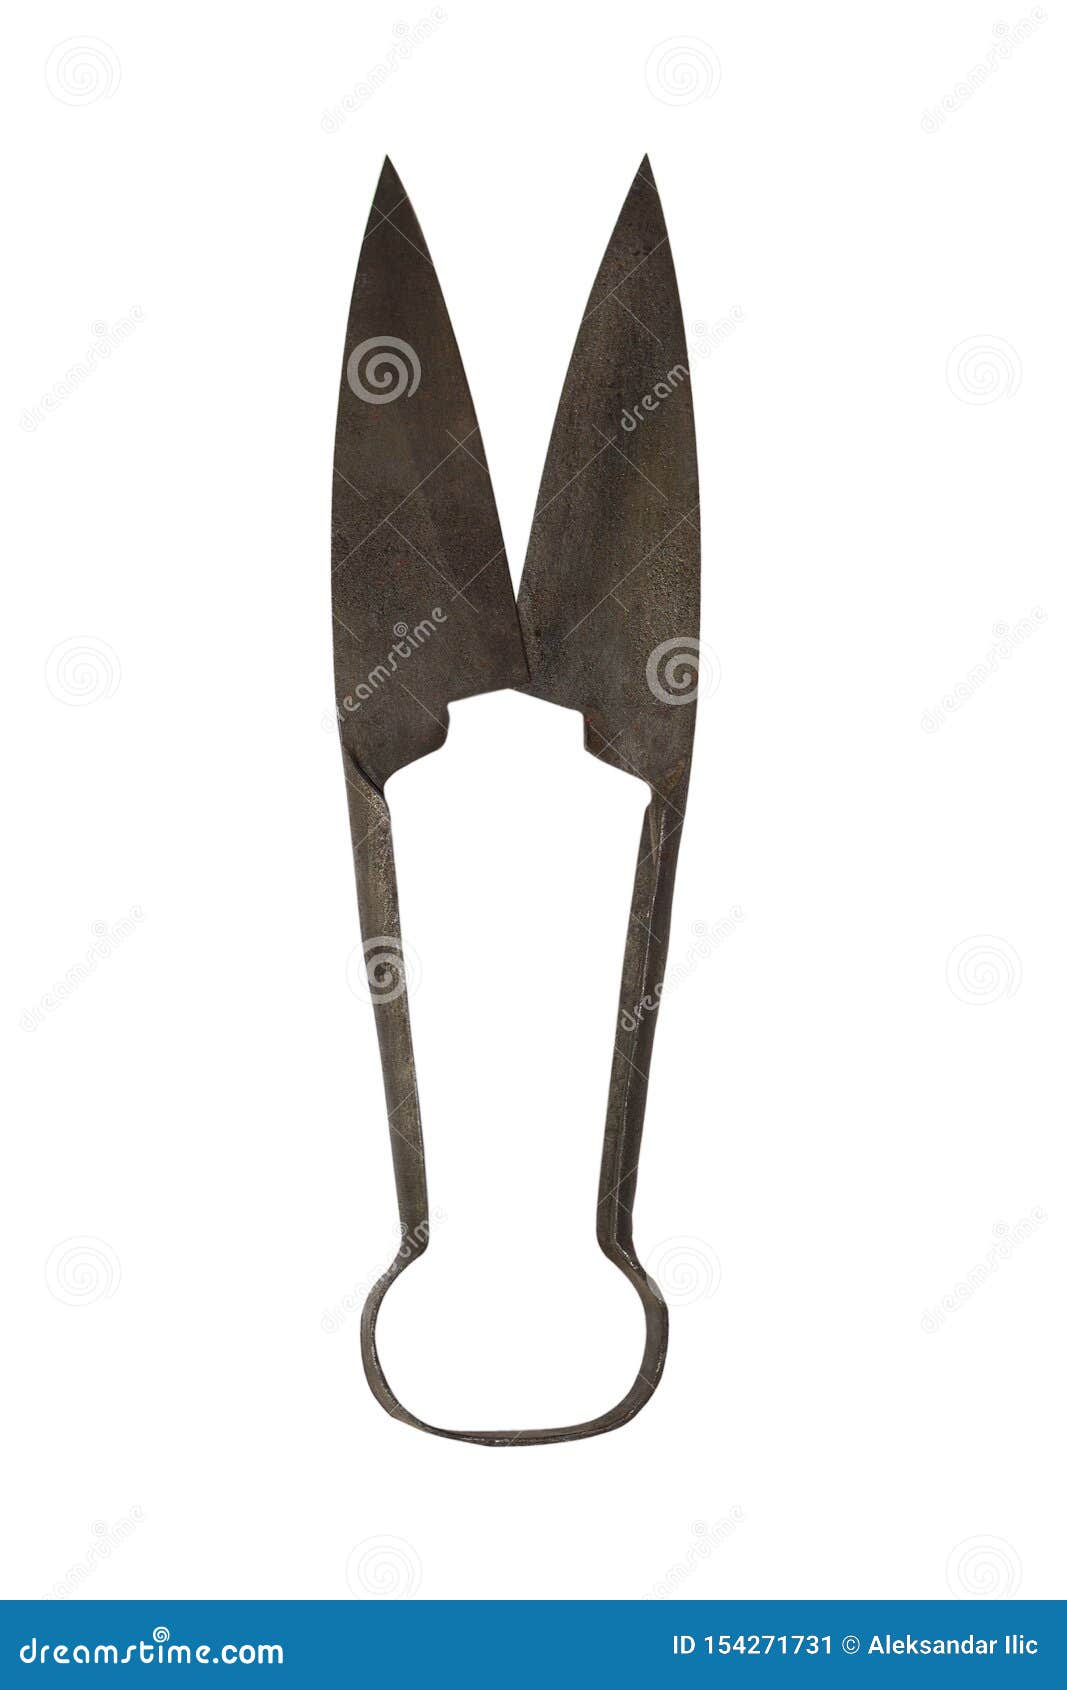 sheep shears. vintage rusted scissors  on white